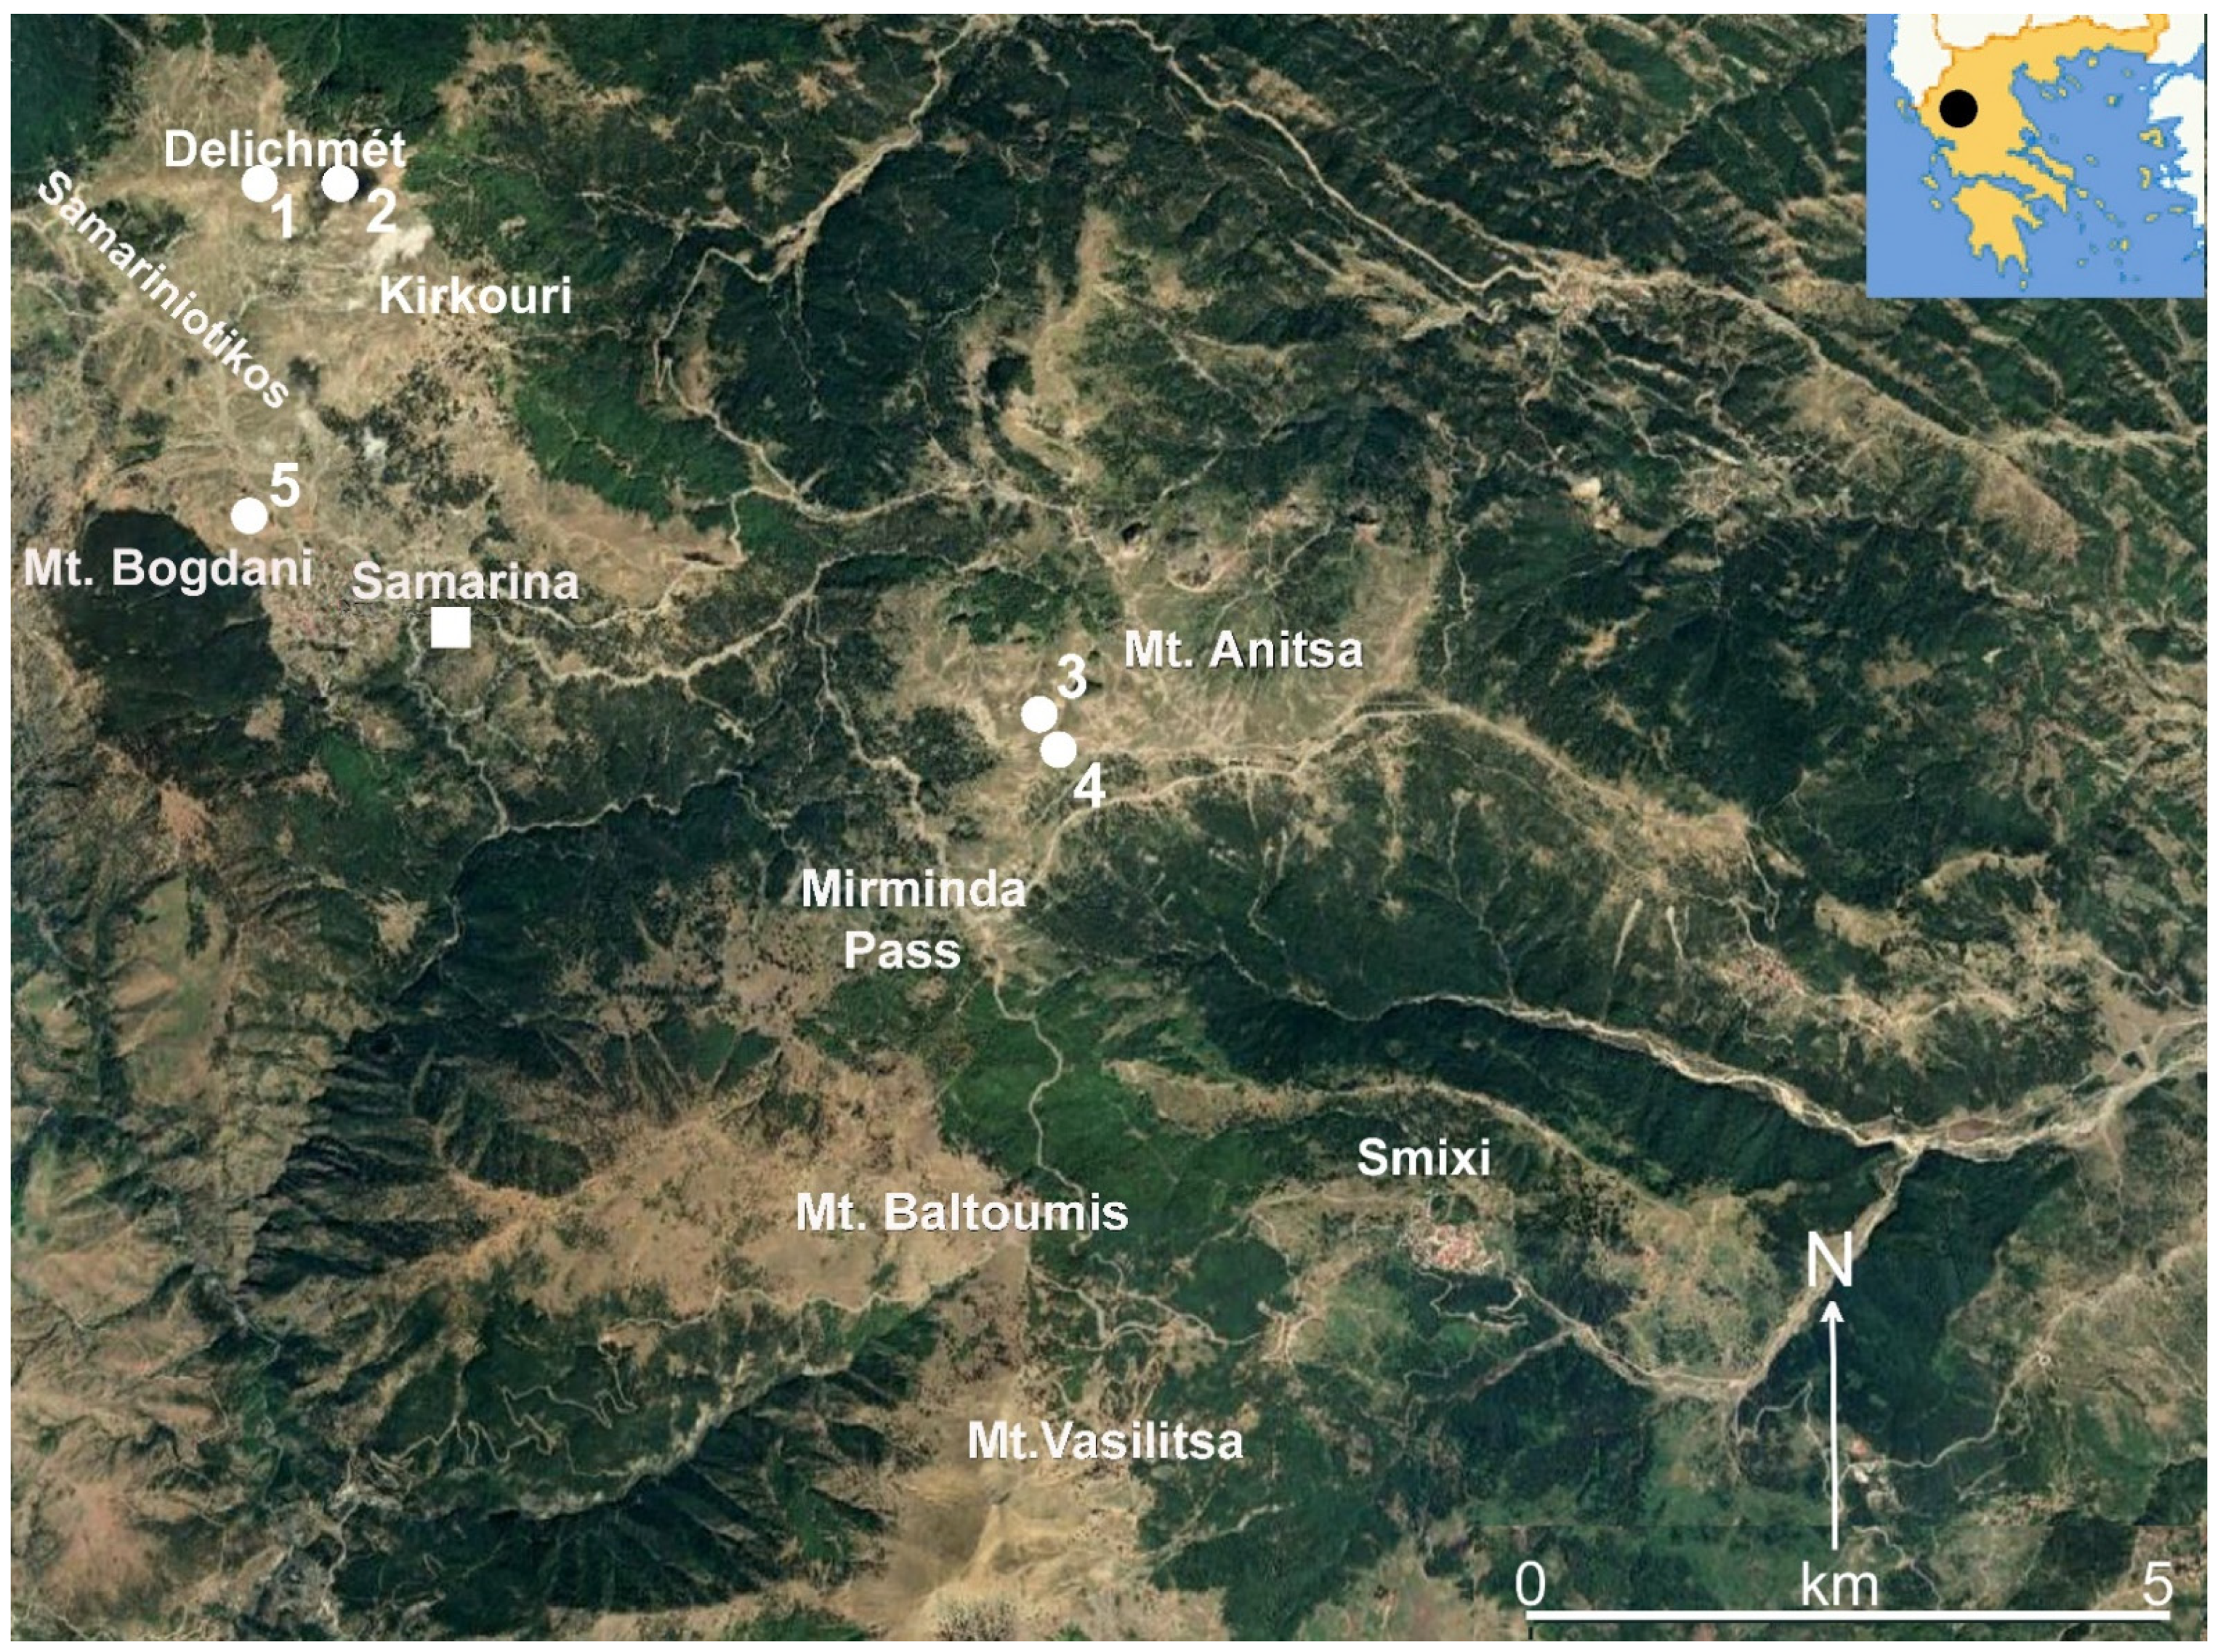 Bijdrage beddengoed grond Land | Free Full-Text | Mountain Landscape and Human Settlement in the  Pindus Range: The Samarina Highland Zones of Western Macedonia, Greece